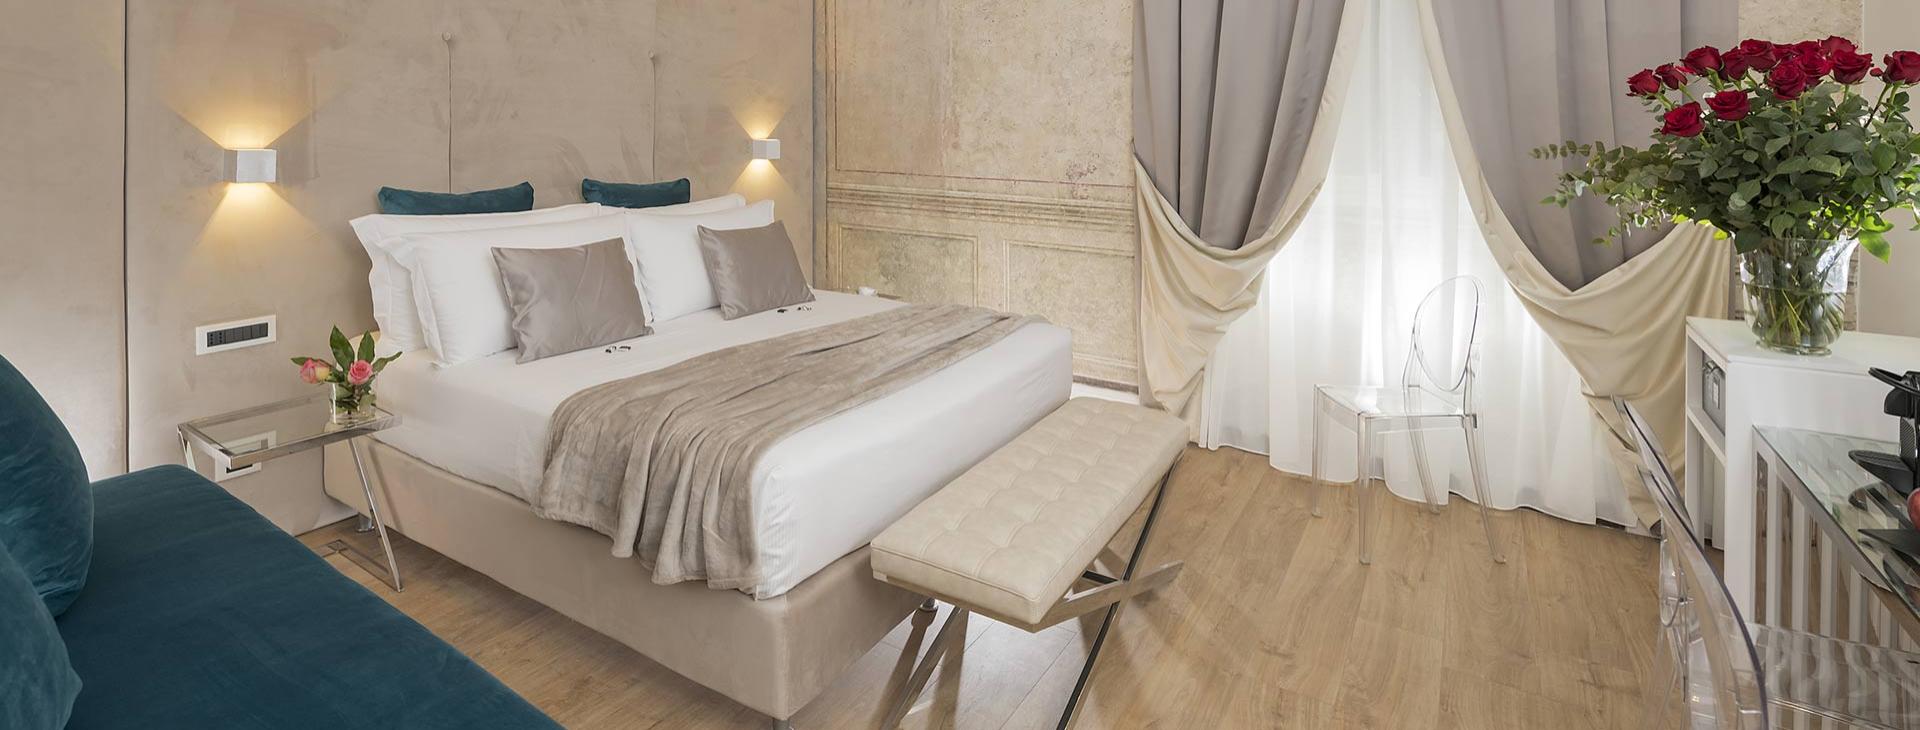 navonastyle fr navona-guest-house-chambre-triple 001